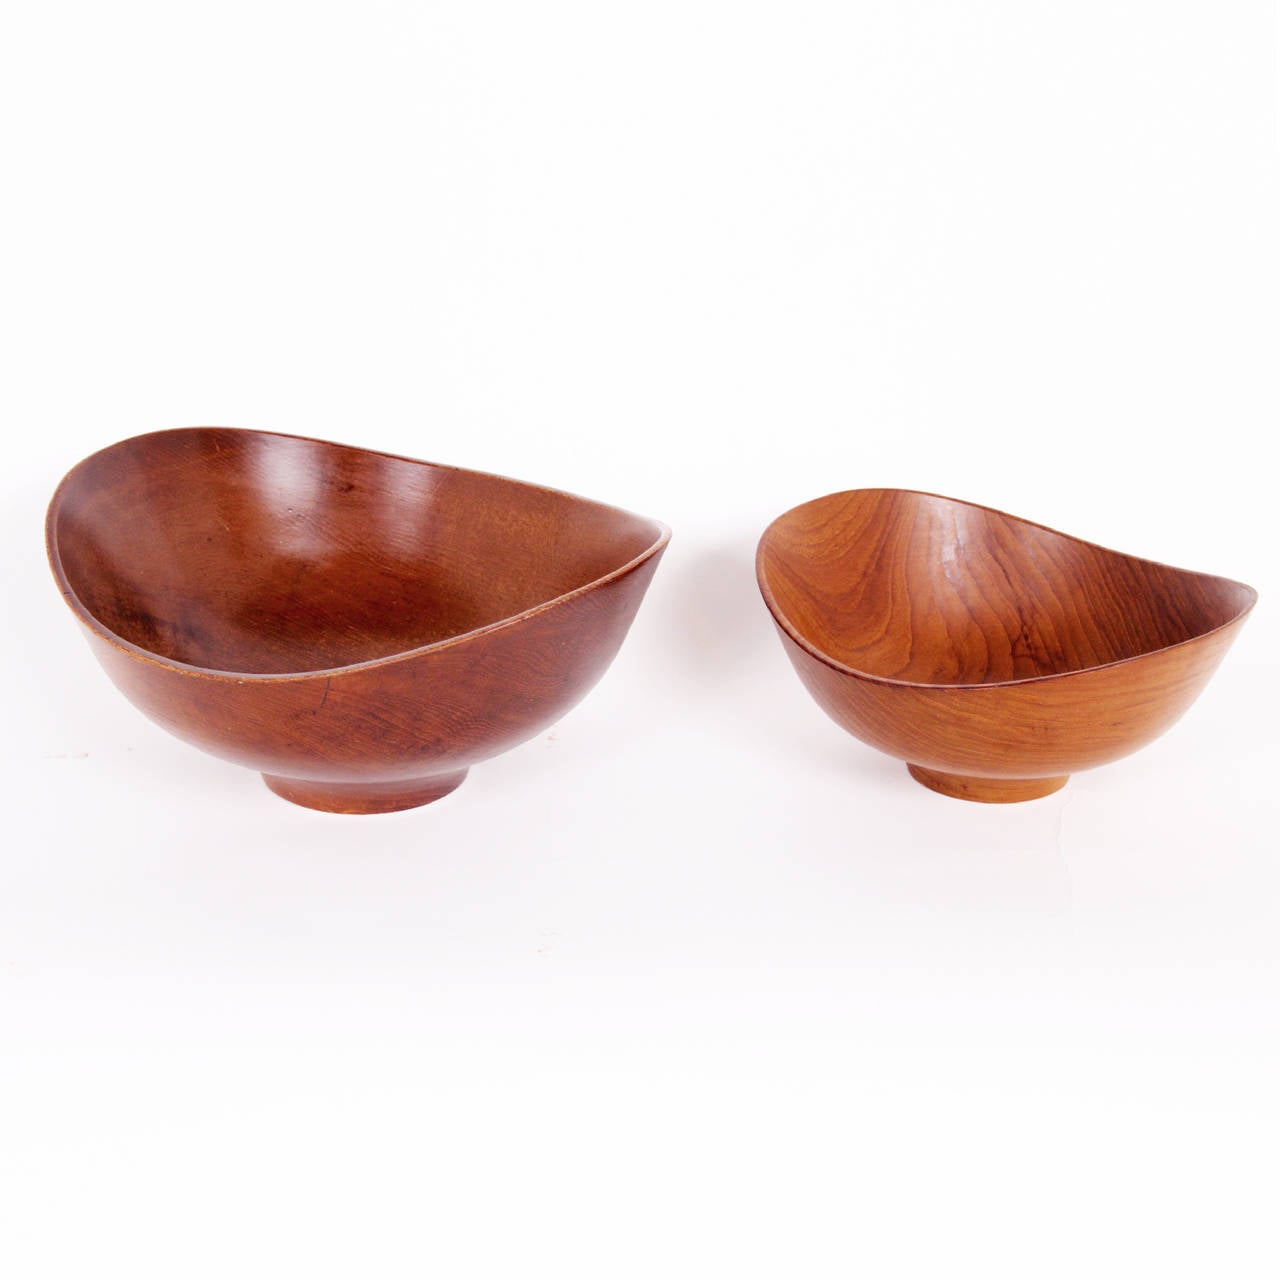 Two sculptural serving bowls made from one piece of turned teak.
Designed by Finn Juhl and manufactured by Kay Bojesens workshop.
Impressed with manufacturer's mark to underside of each example: [Kay
Bojesen Denmark Design Finn Juhl Teak].
Size